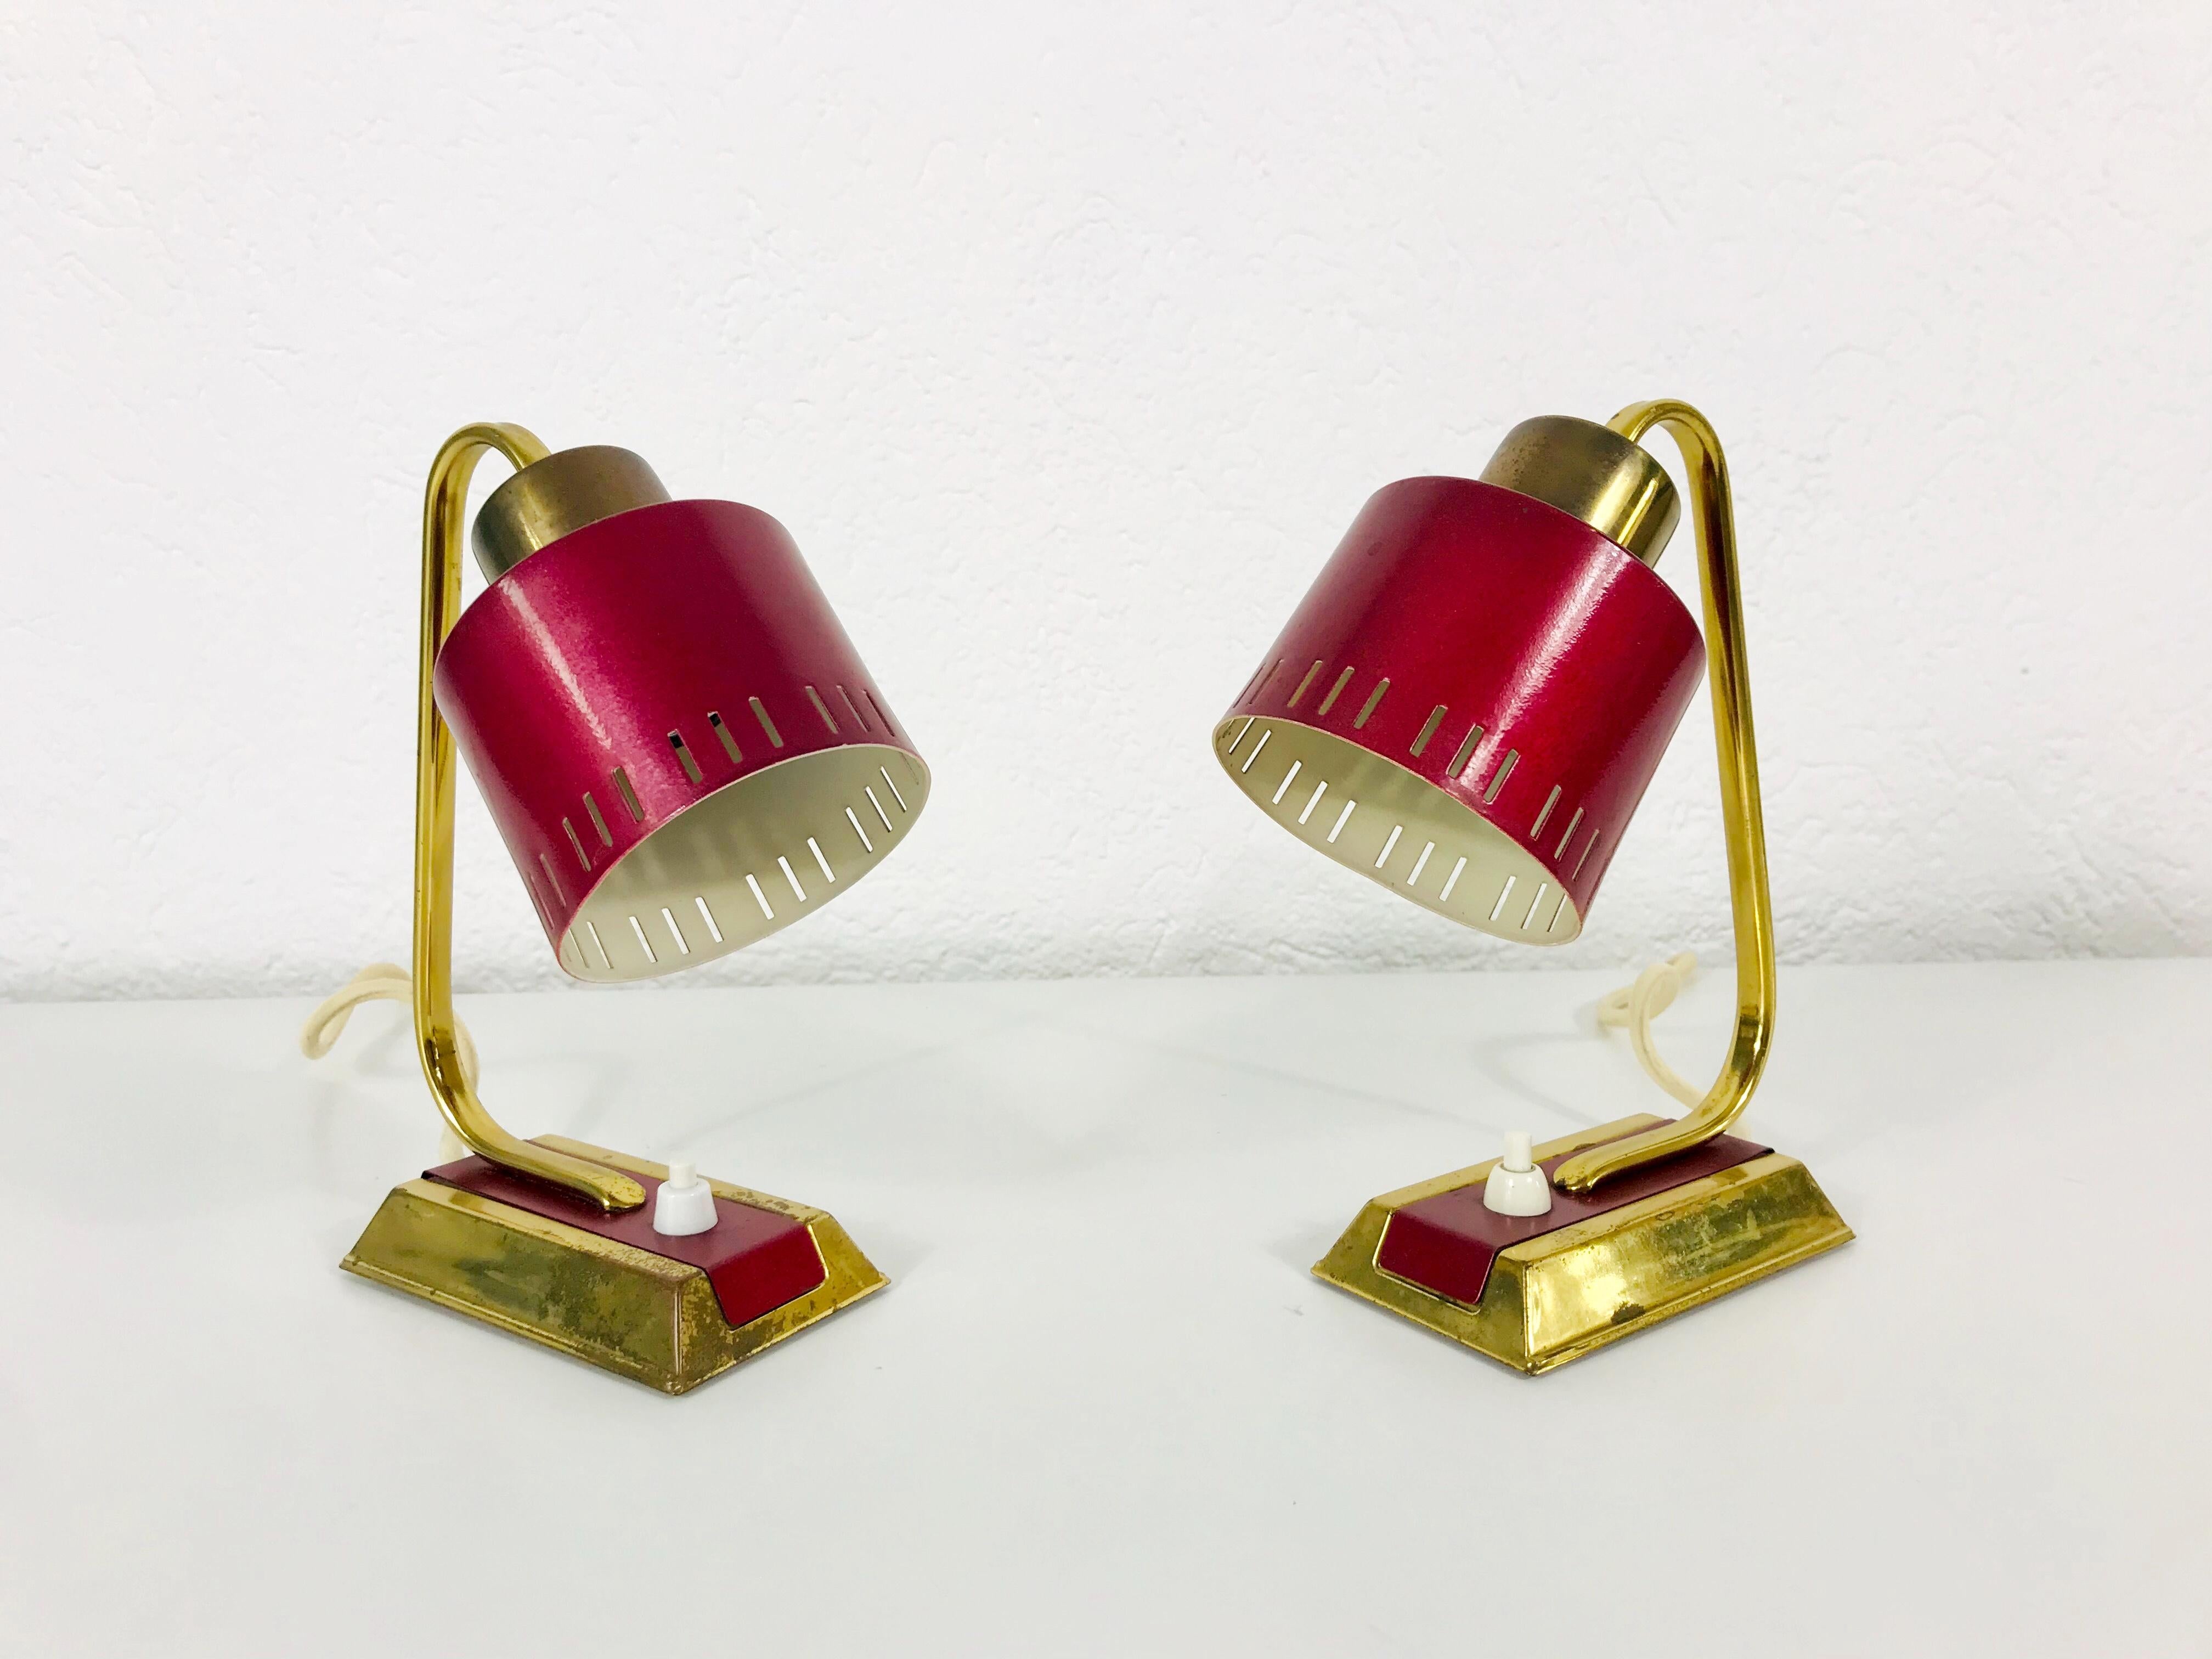 European Mid-Century Modern Brass and Red Table Lamp, Pair, 1960s